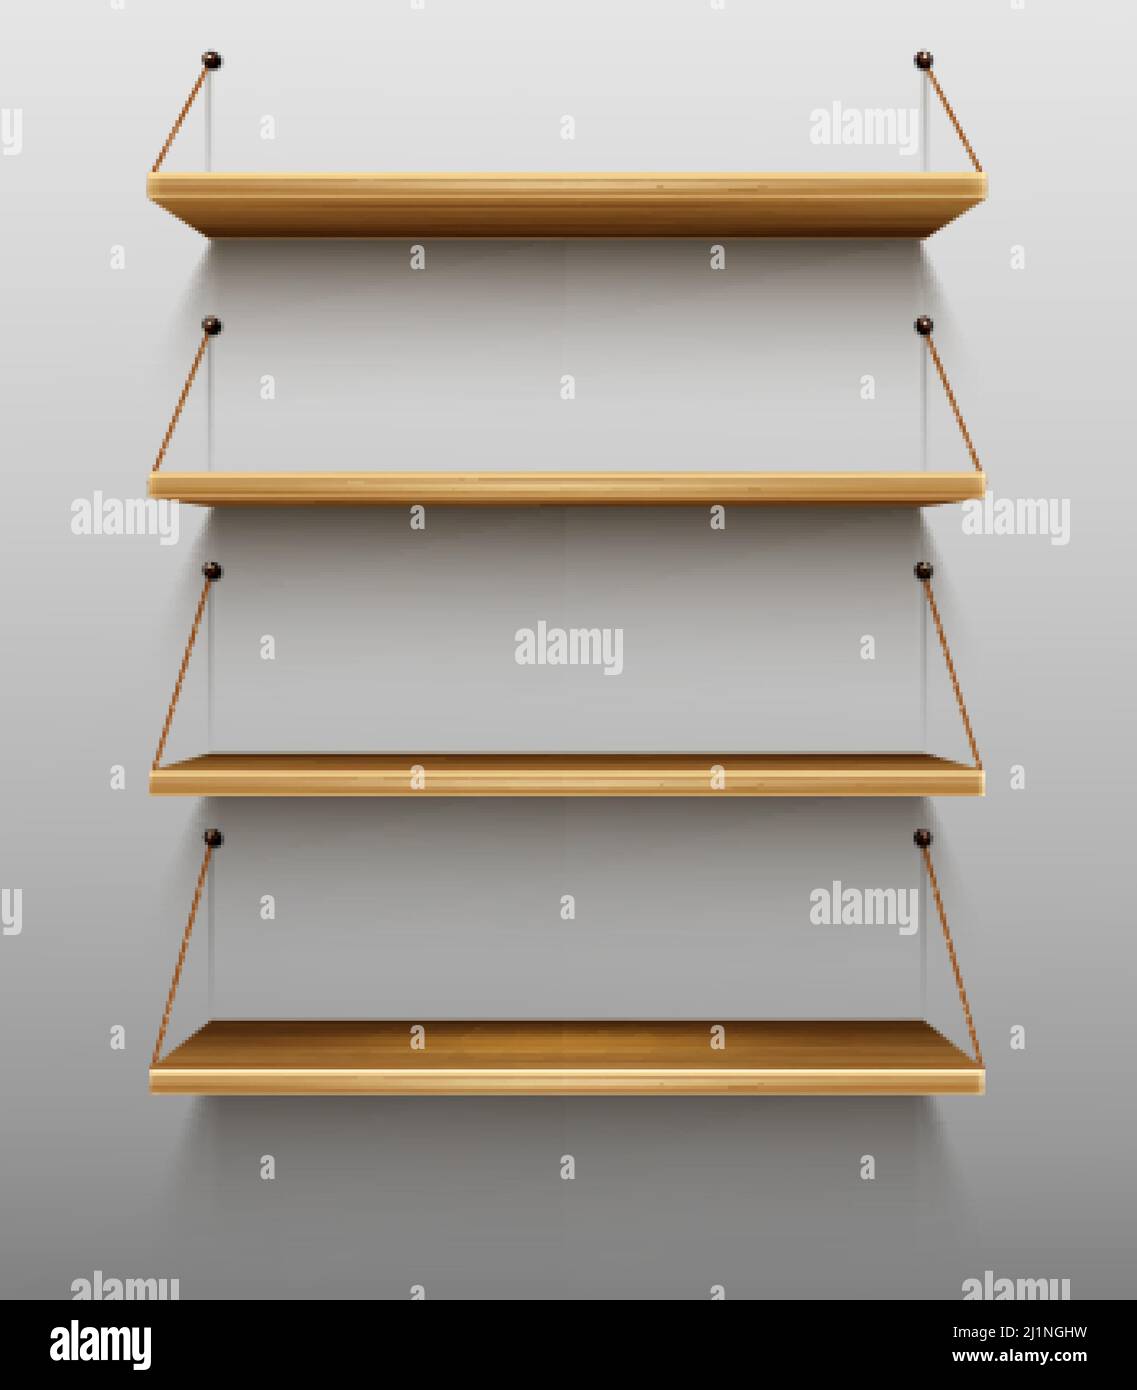 Empty wooden bookshelves on wall, shelves for books in library, wood rack hanging on ropes in store, brown timber planks for storage or gallery exhibi Stock Vector